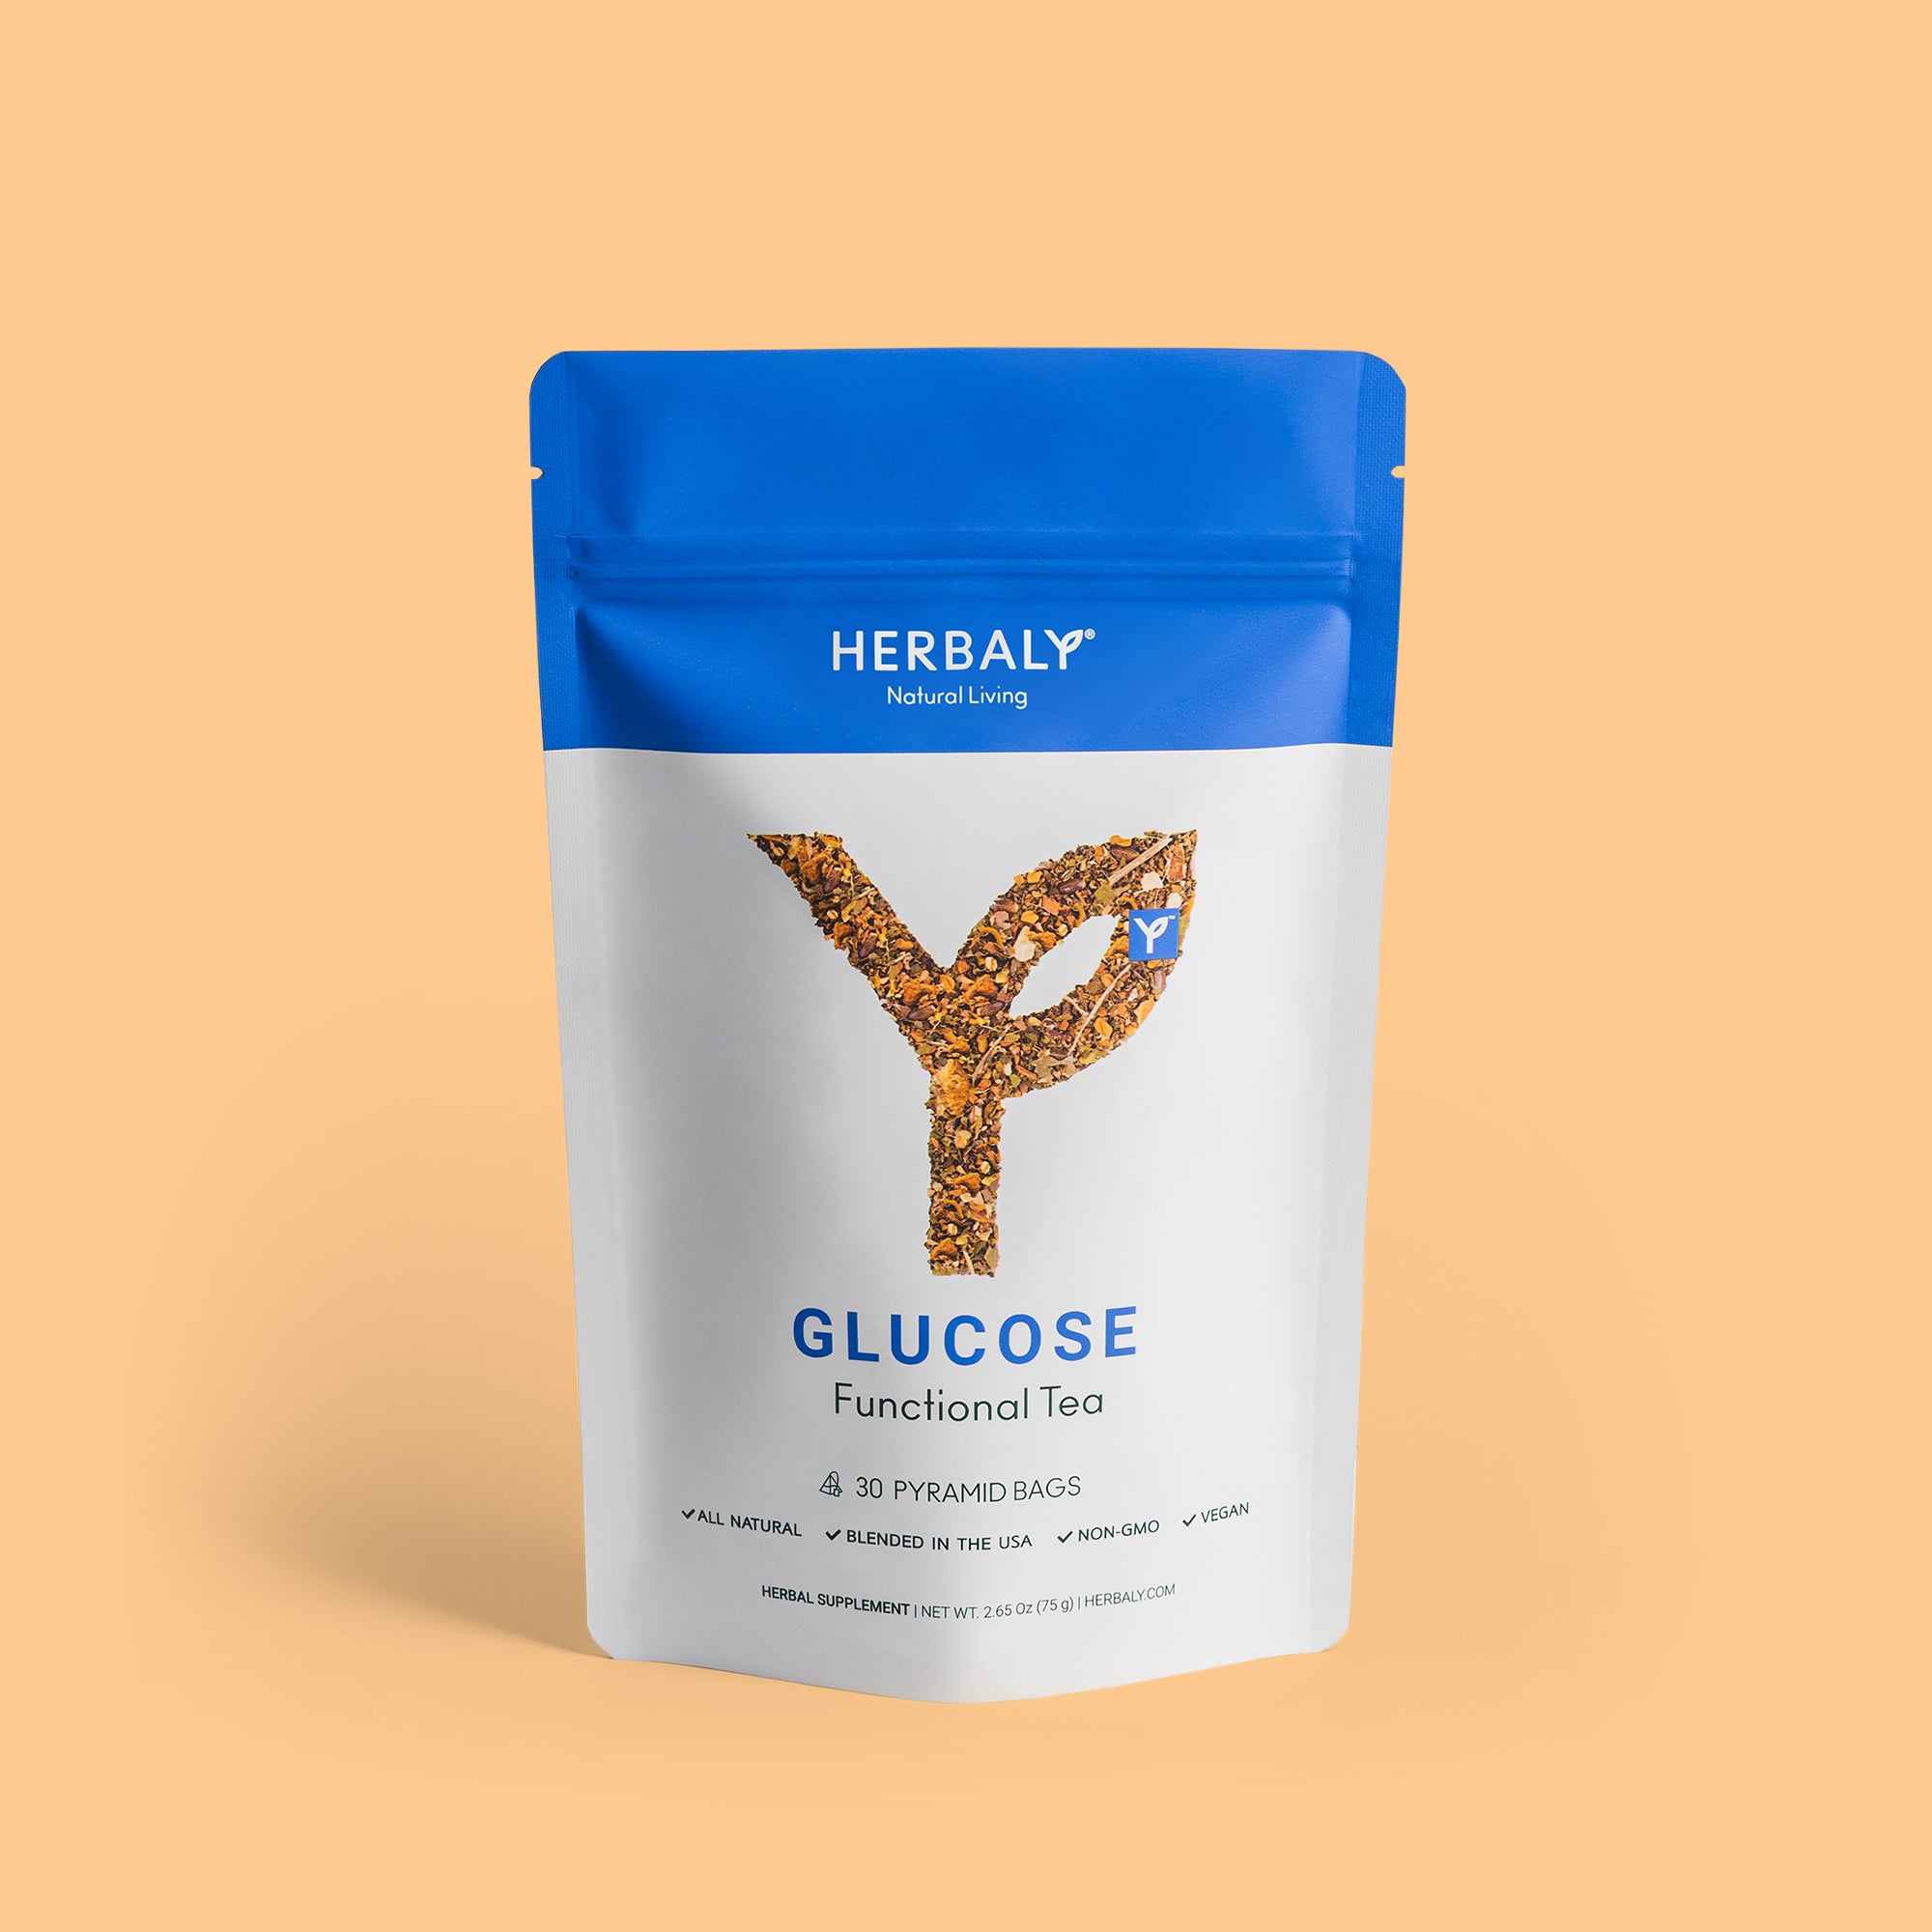 Front shot of Herbaly's Glucose Functional Tea package showing the label details